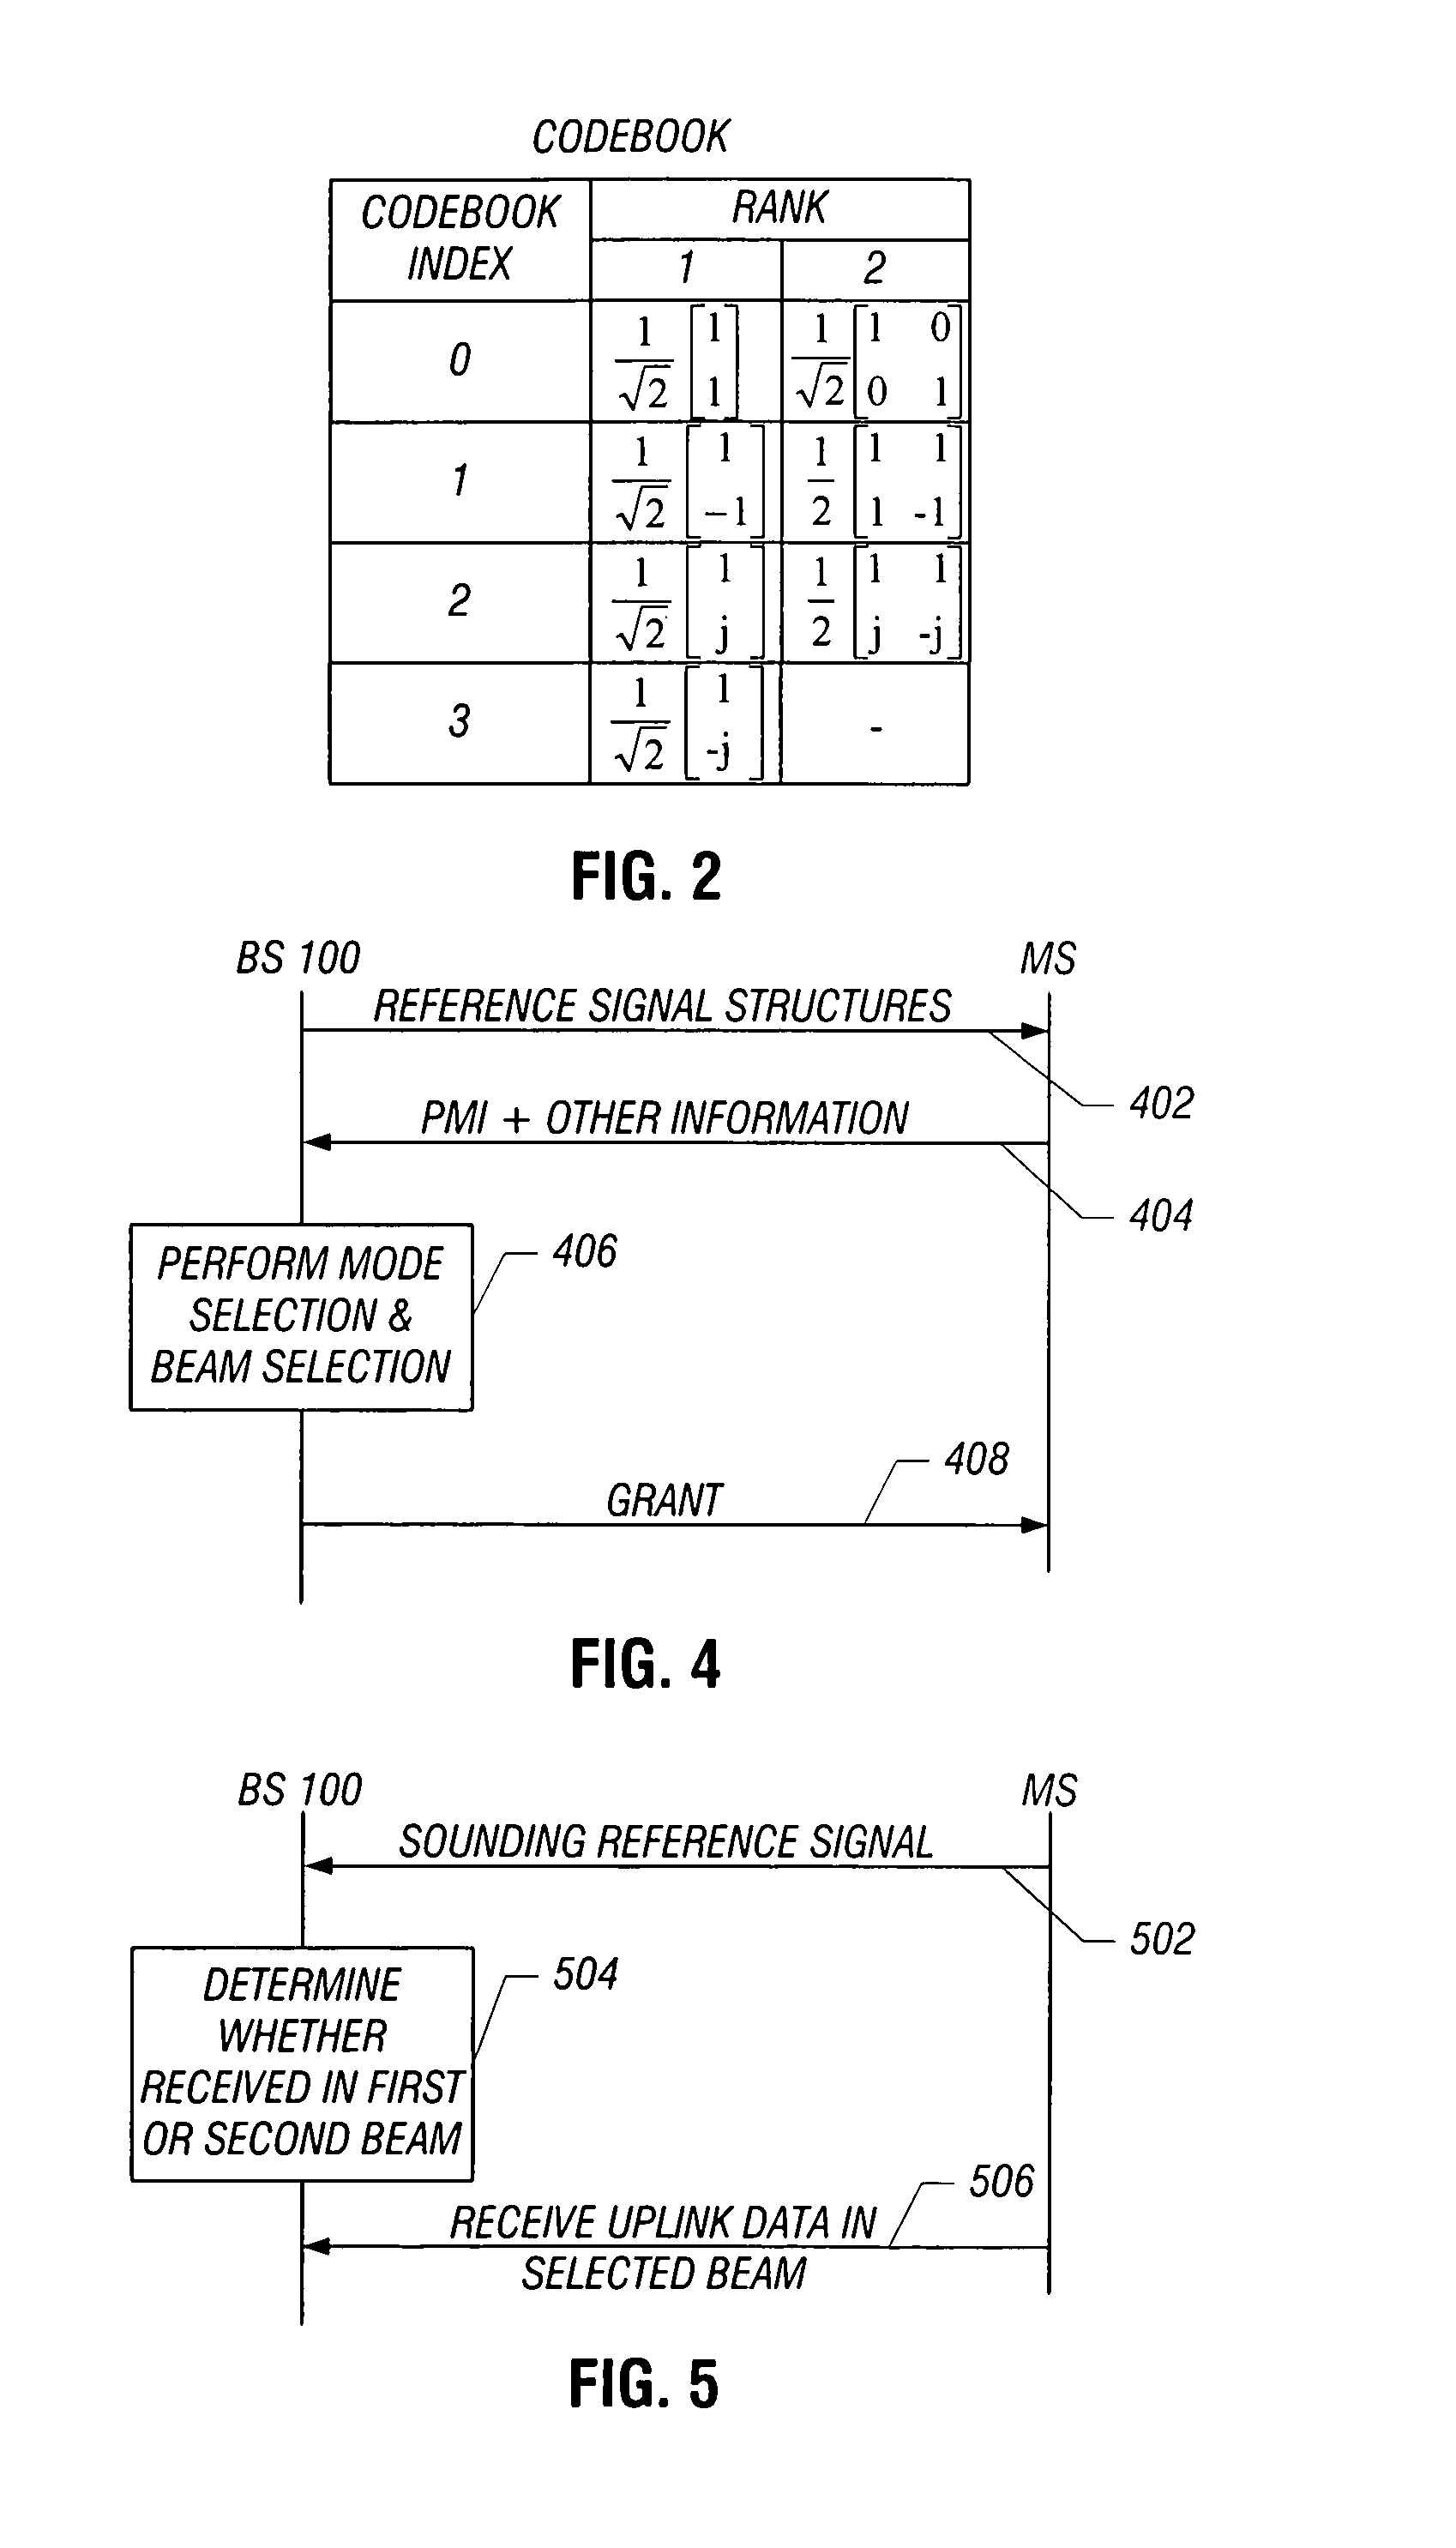 Providing space division multiple access in a wireless network